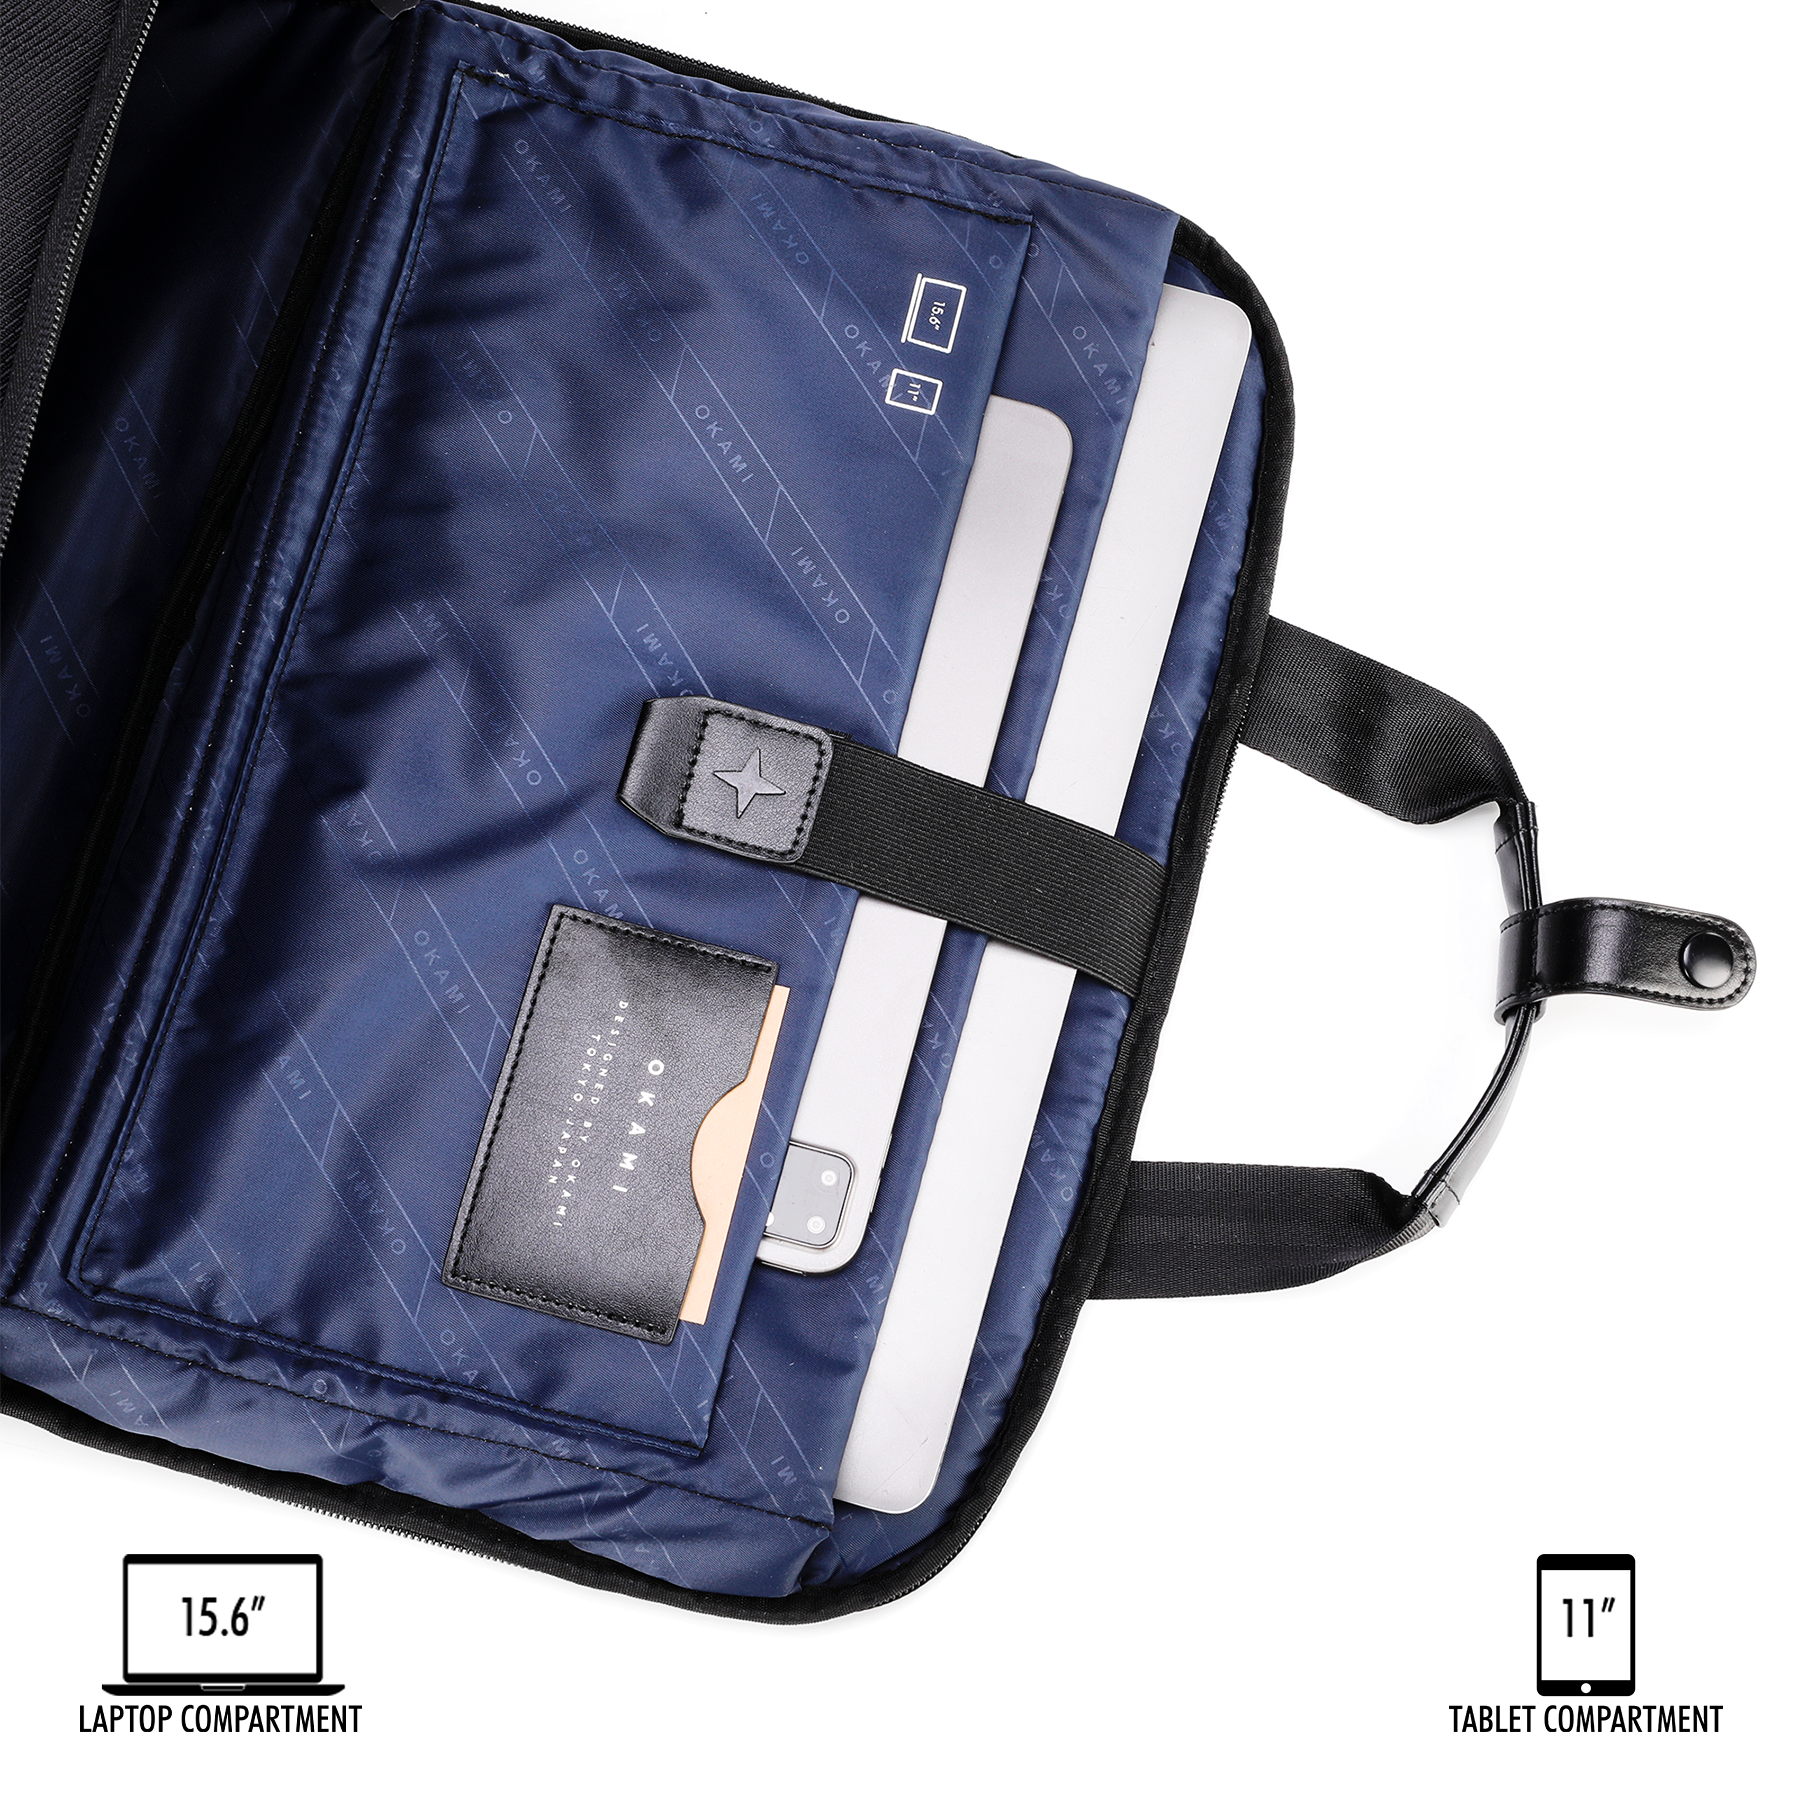 ZenPack LUXE Laptop Messenger Bag X Briefcase with USB Fast-Charging | RFID Safe Advanced Organiser